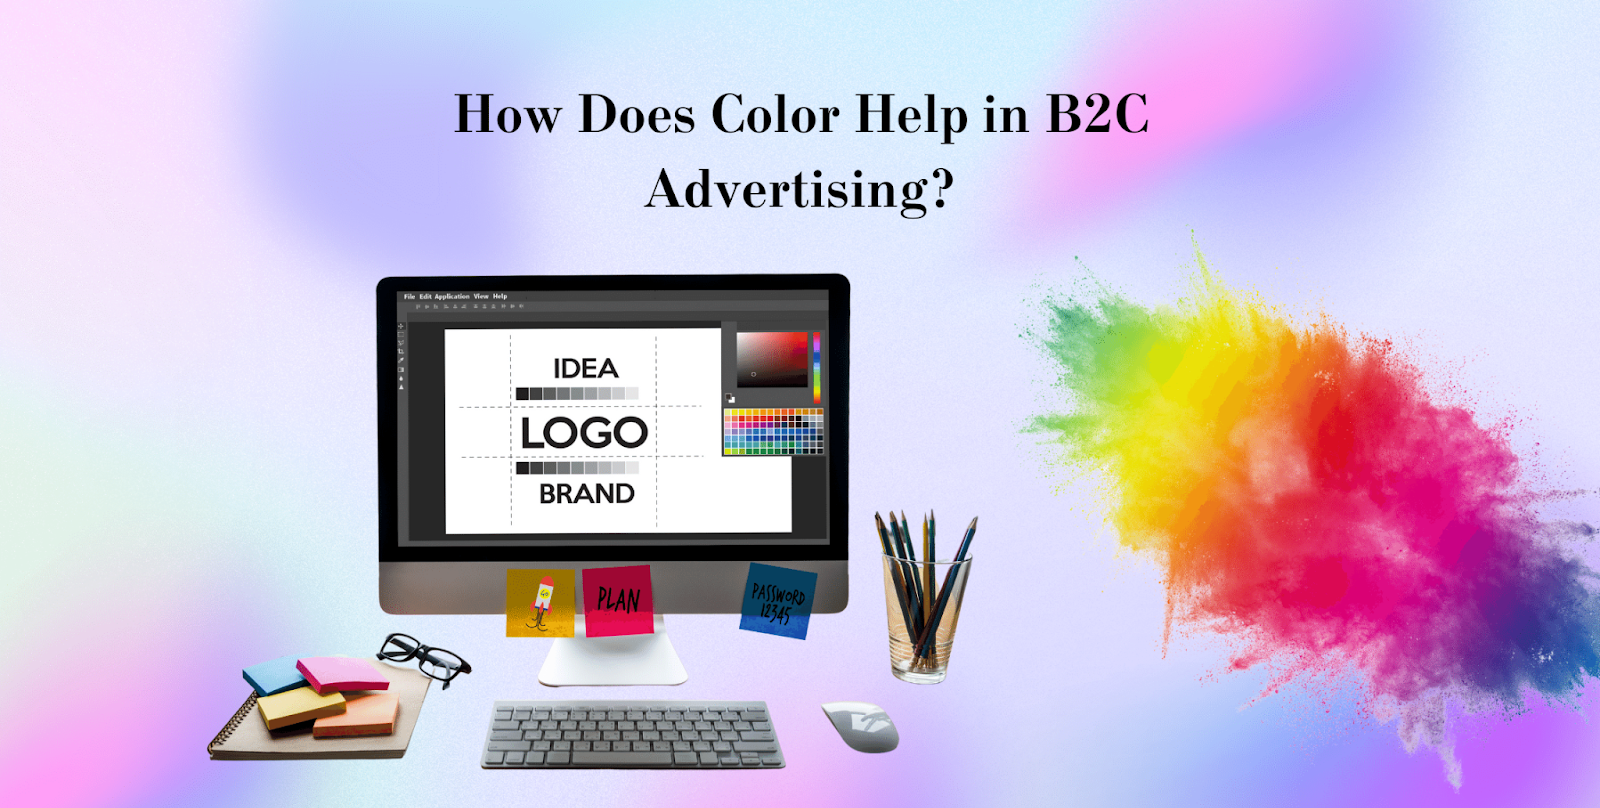 How Does Color Influence Consumers in B2C Advertising? 